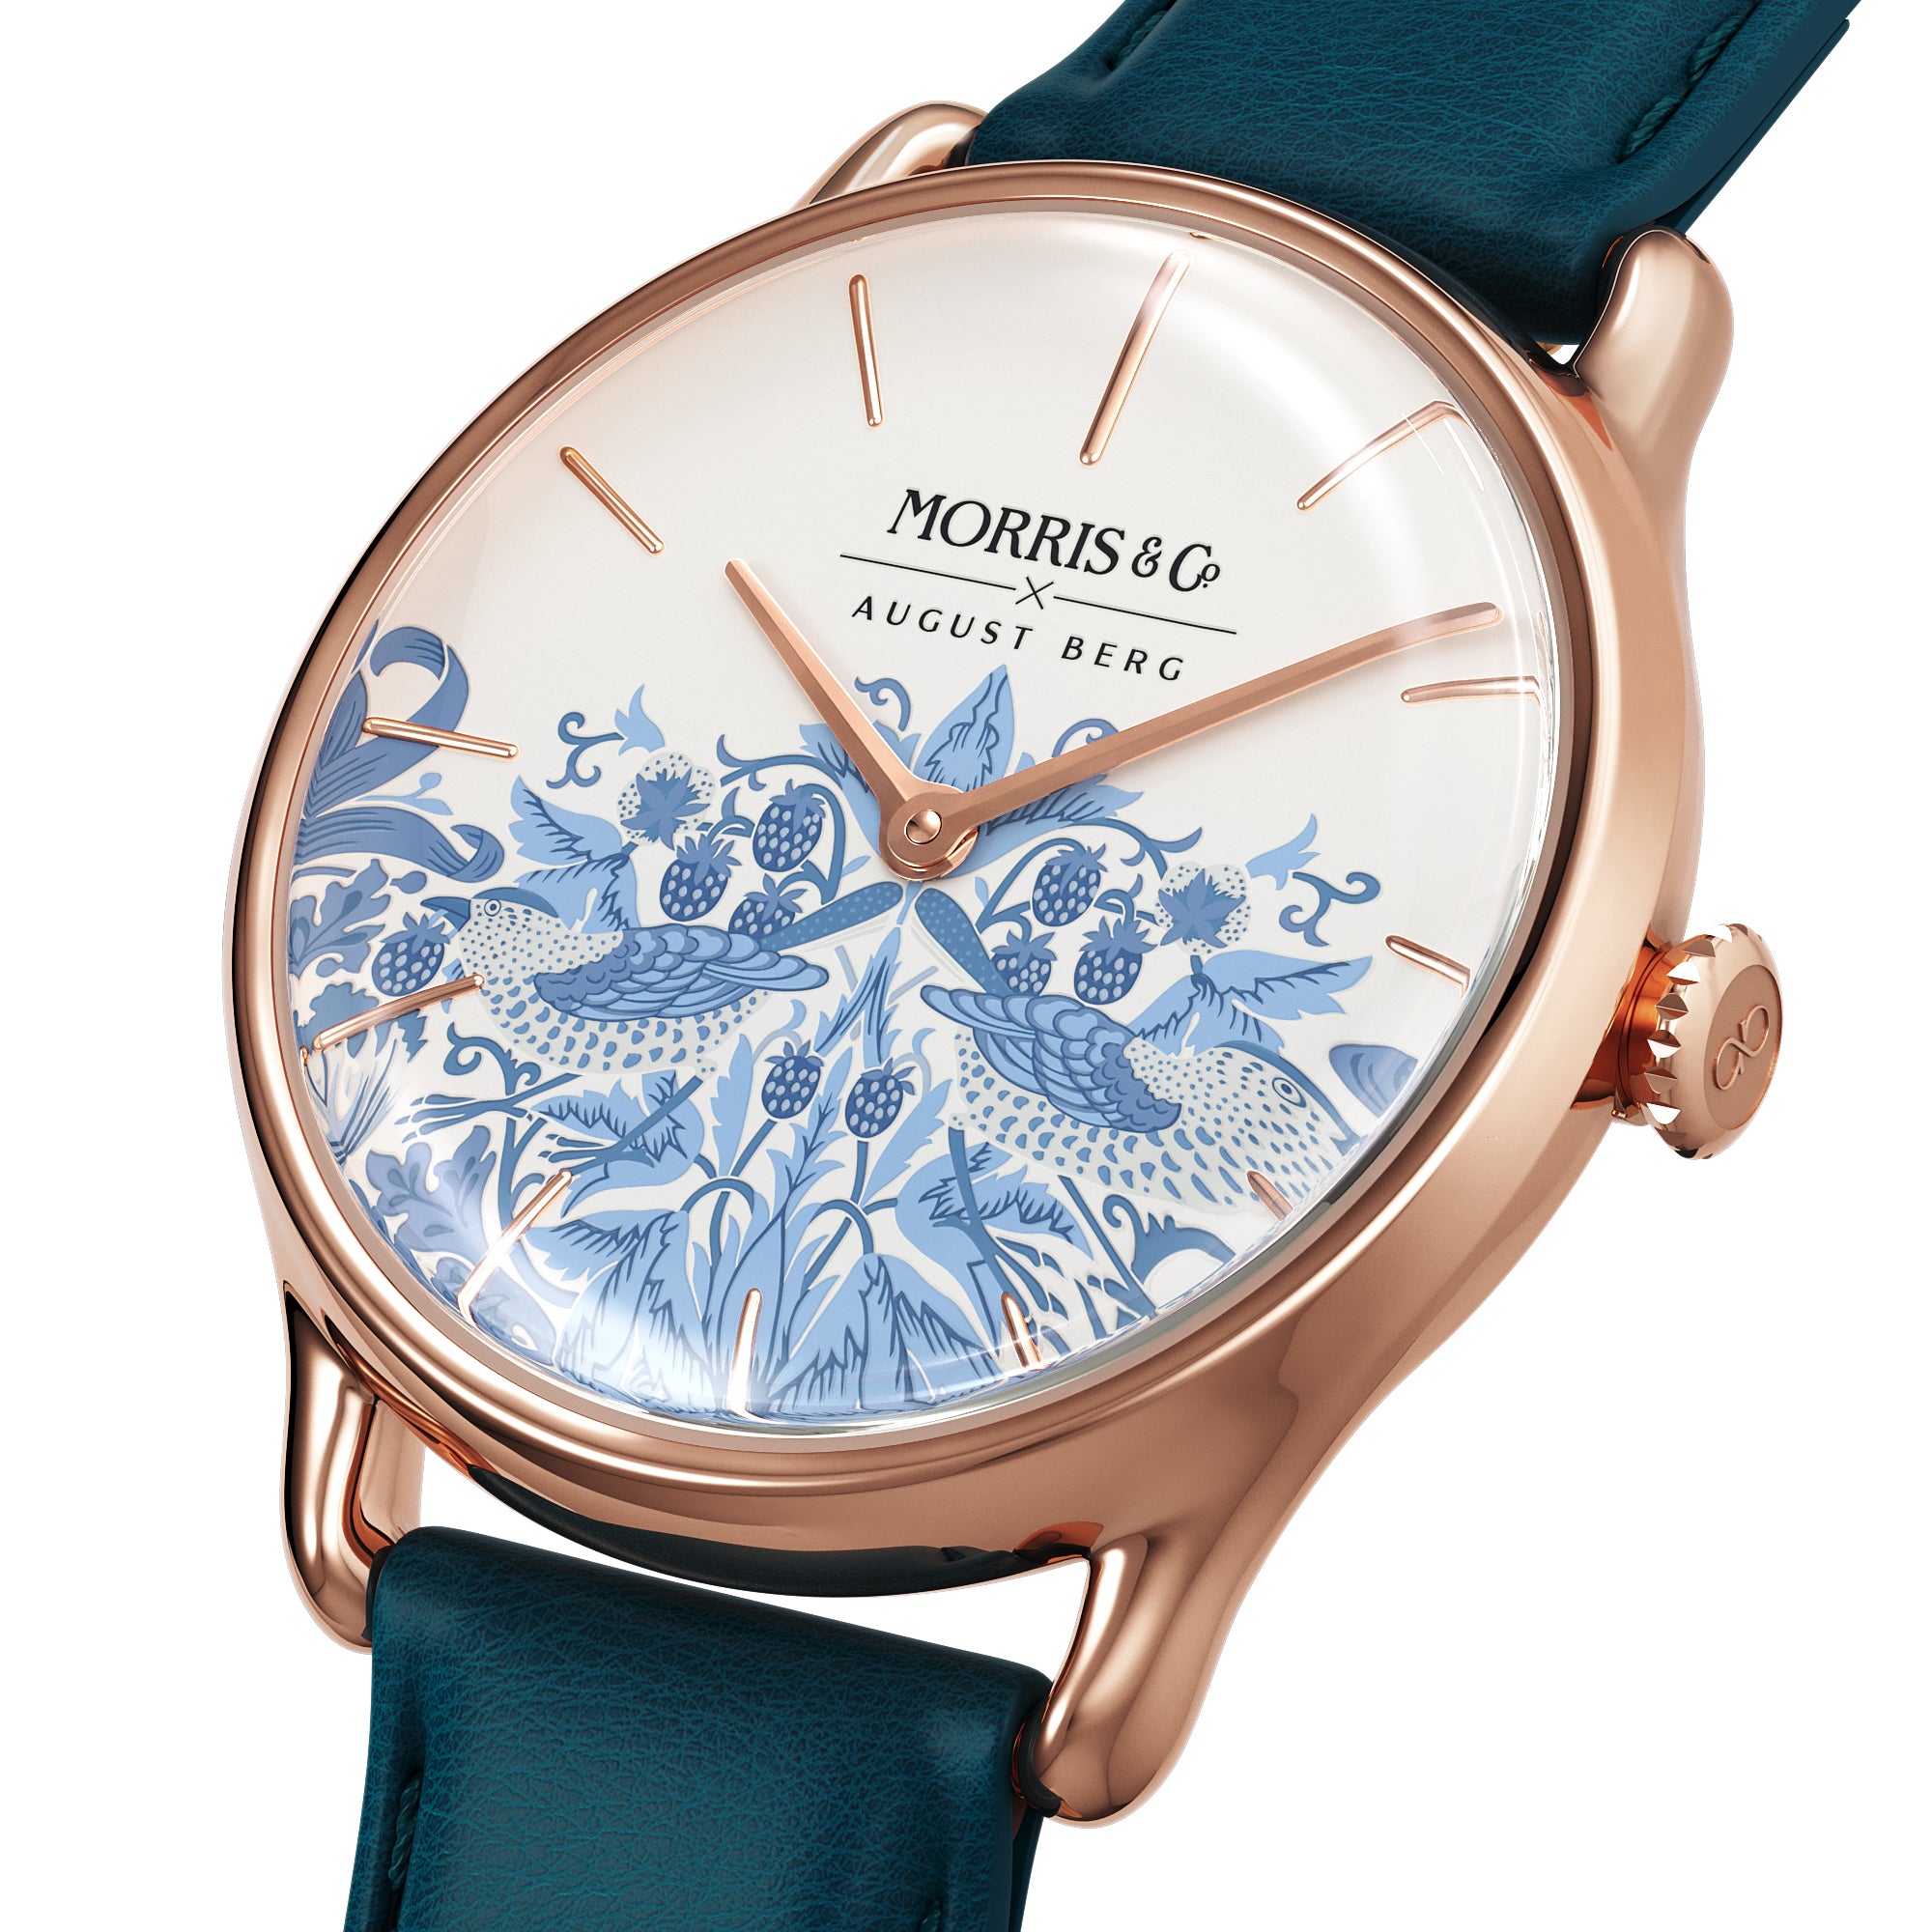 Rose Gold Watch | Woad Blue Italian Leather | Simply Strawberry Thief | AUGUST BERG x MORRIS & CO.